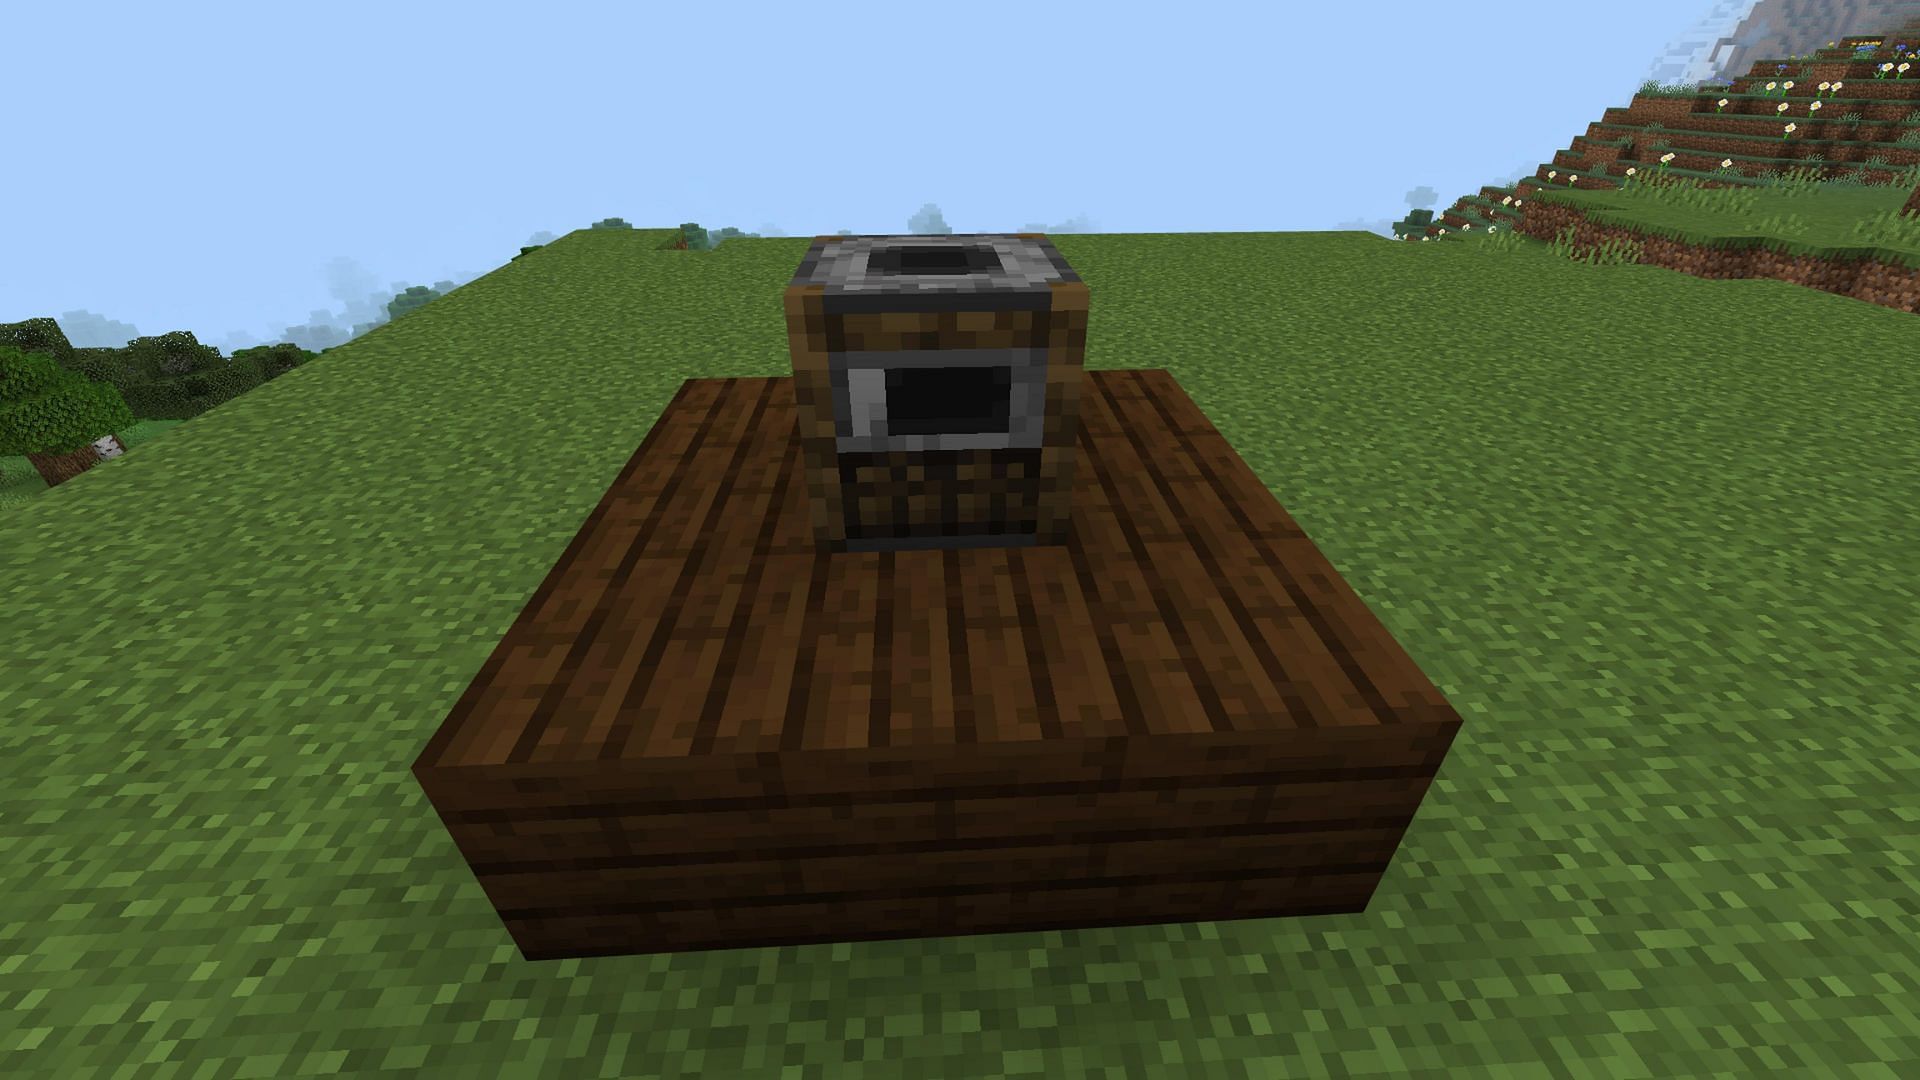 The smoker can cook food in Minecraft (Image via Mojang)